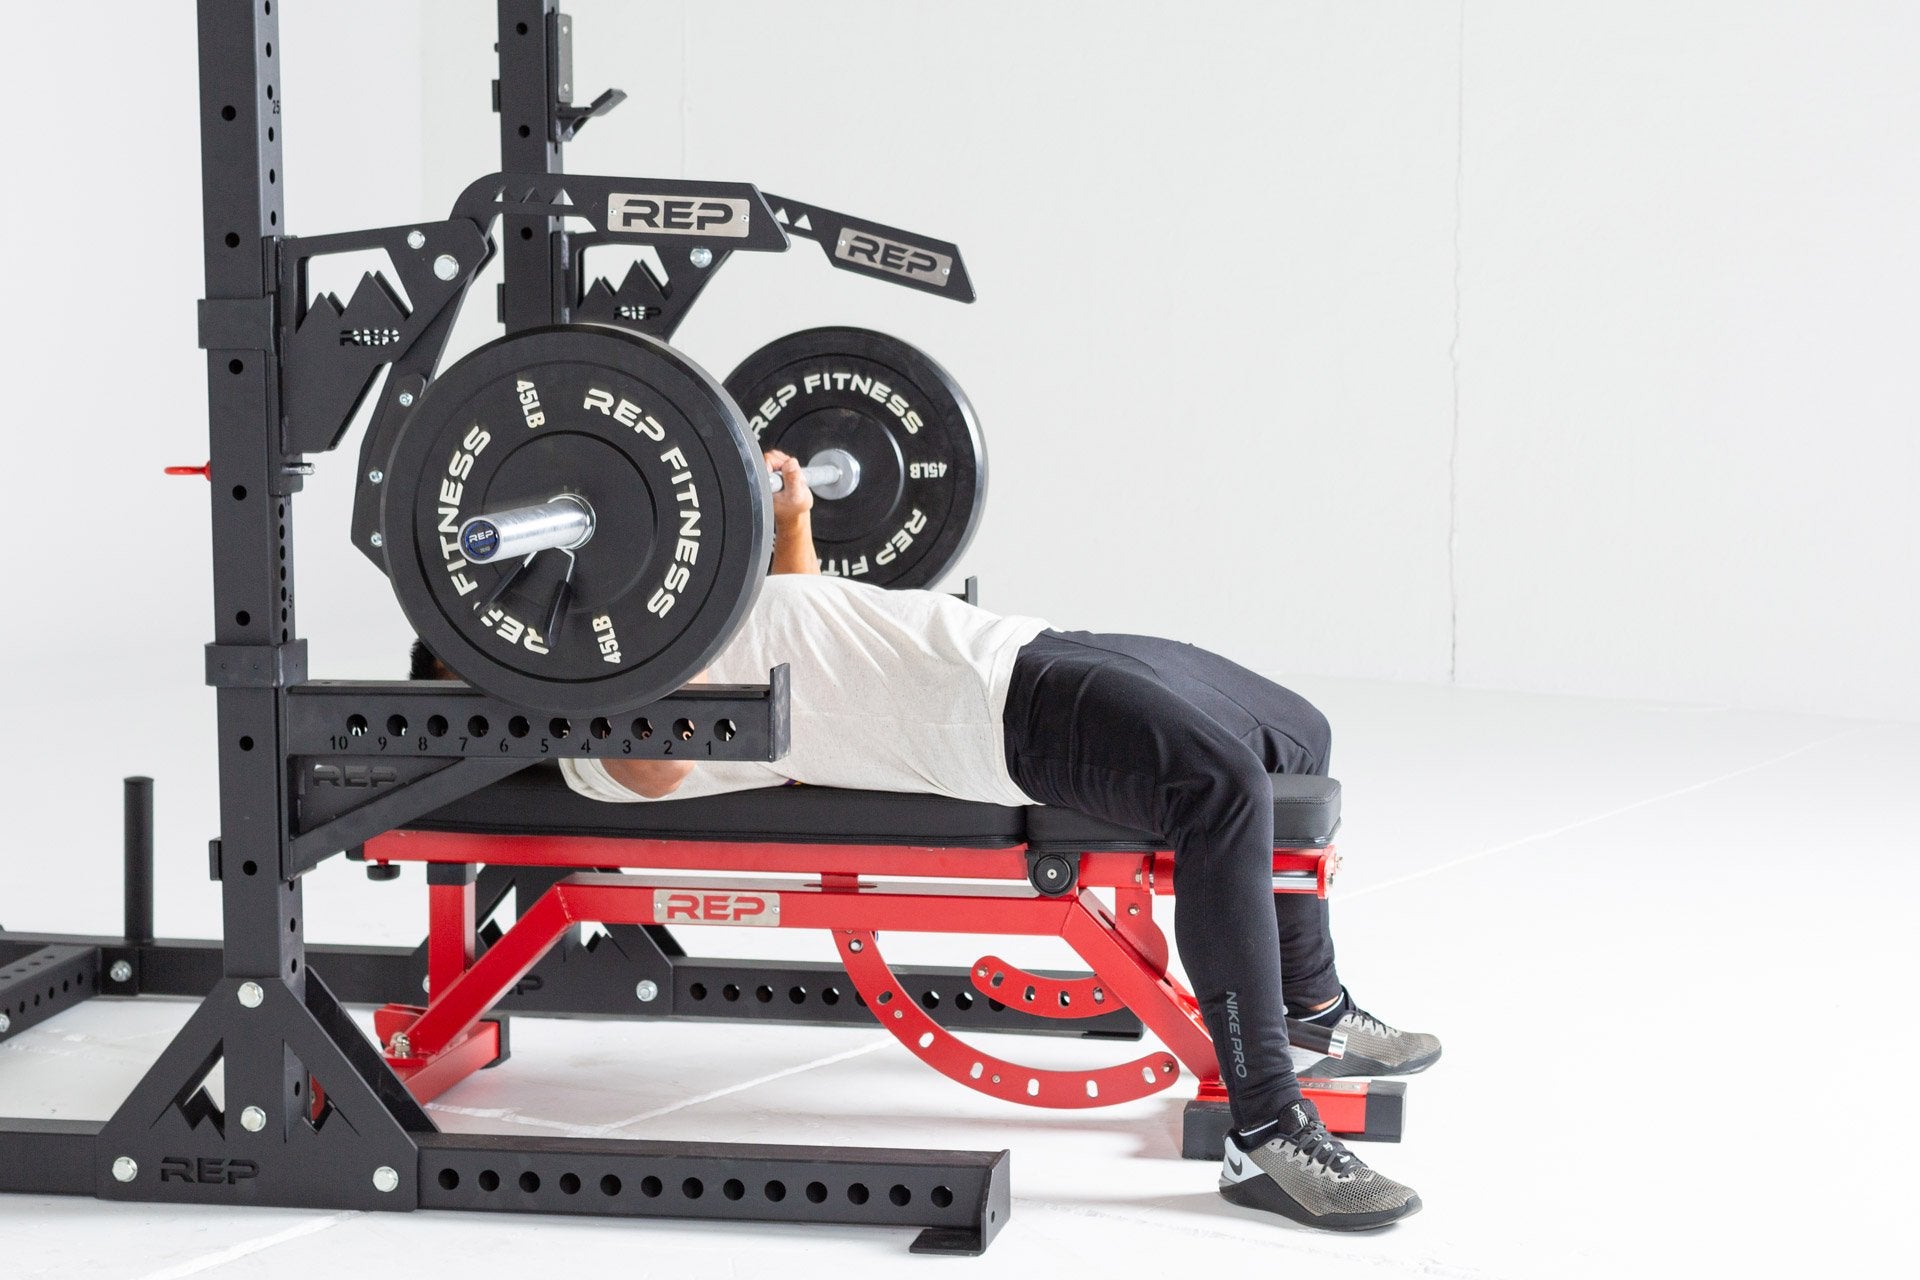 Lifter lying on an AB-5000 Bench inside a REP Squat Rack with REP Monolift Arms and Spotter Arms performing a bench press with a barbell loaded with a pair of 45lb Black Bumper Plates.